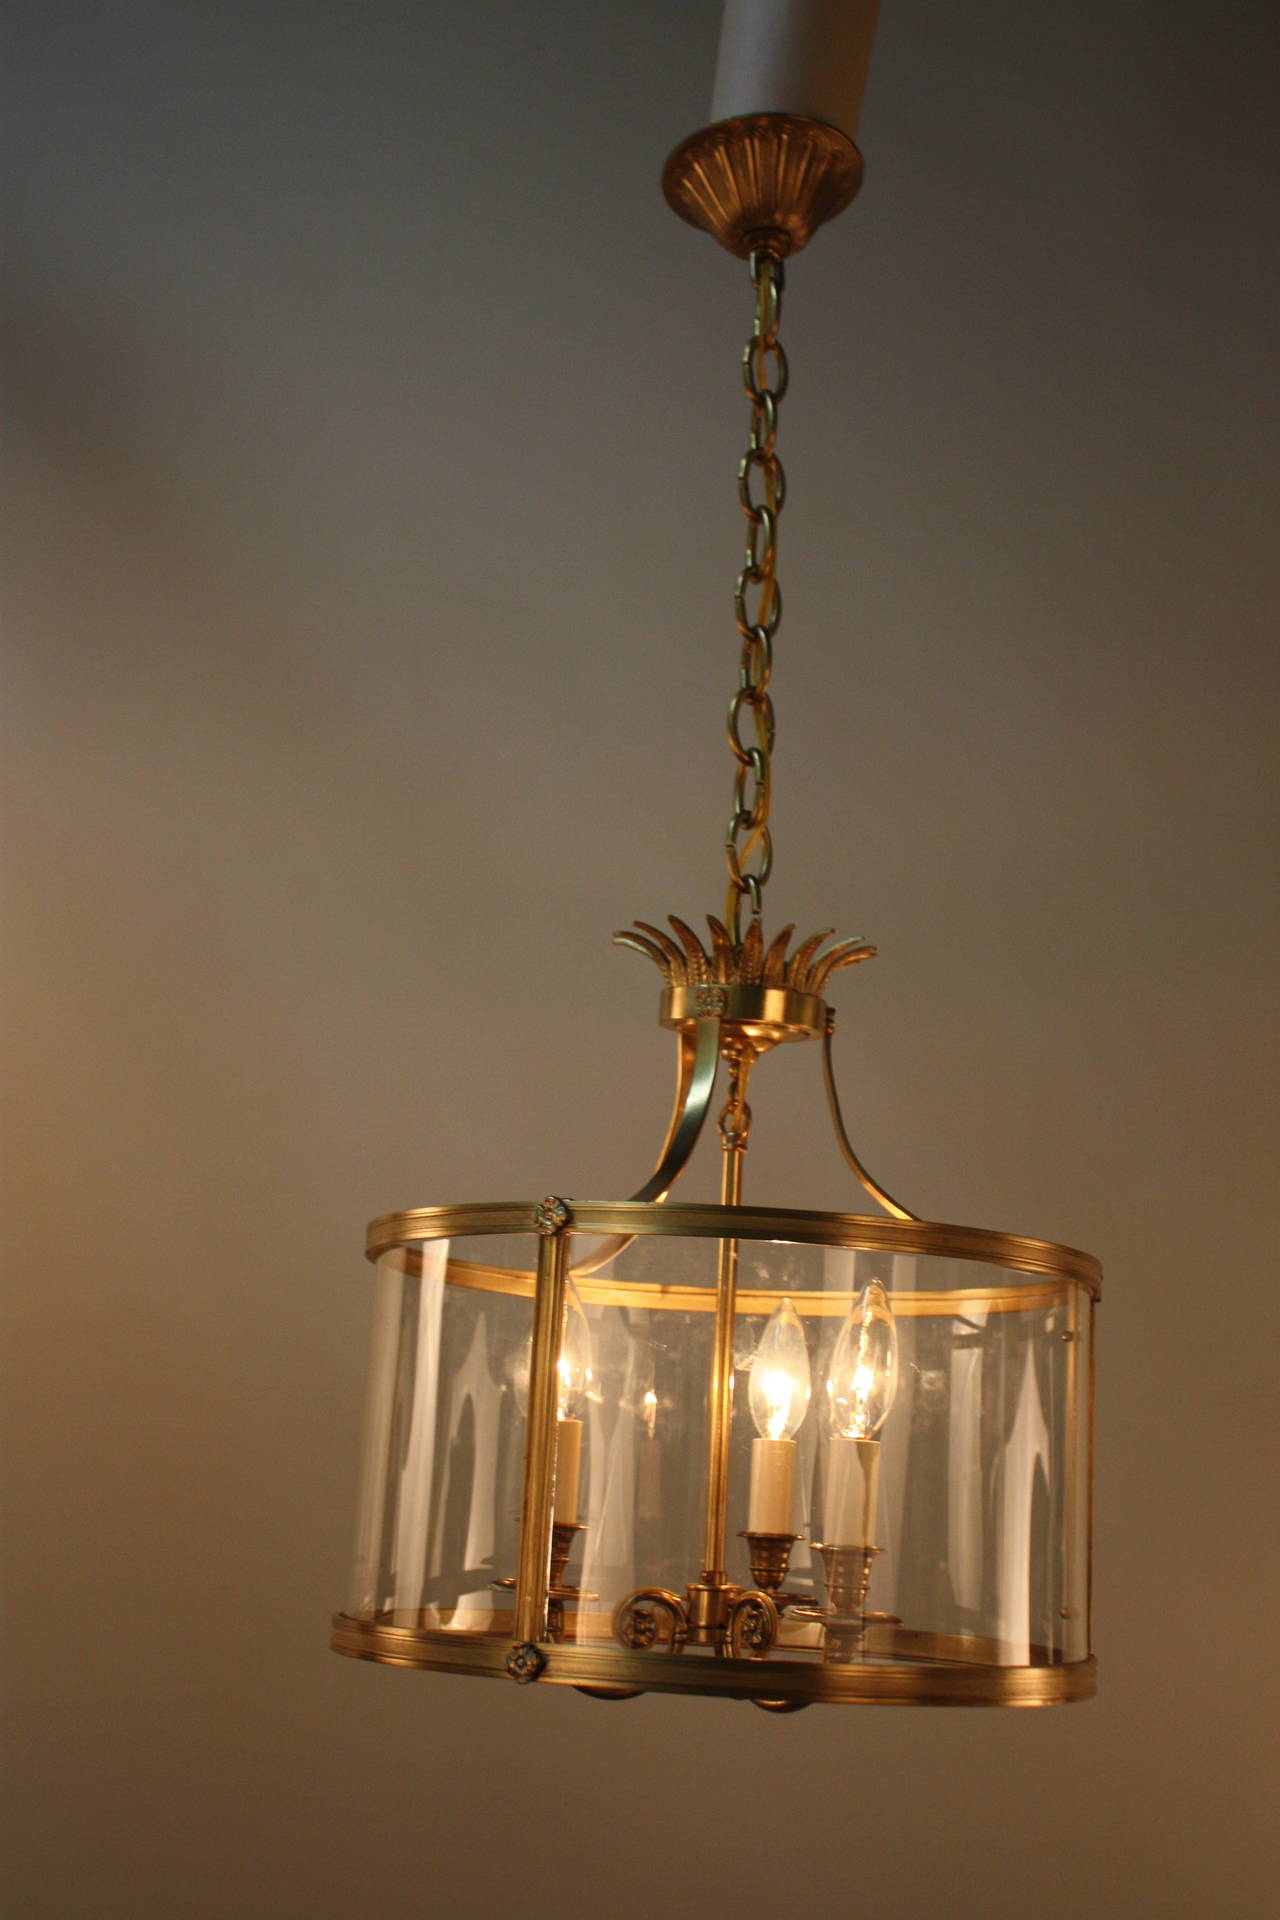 Made in France during the 1950s, this bronze lantern is exceptionally beautiful. Three candelabra style lights elegantly illuminate this lantern's breathtaking detail work. An absolutely superb lantern.